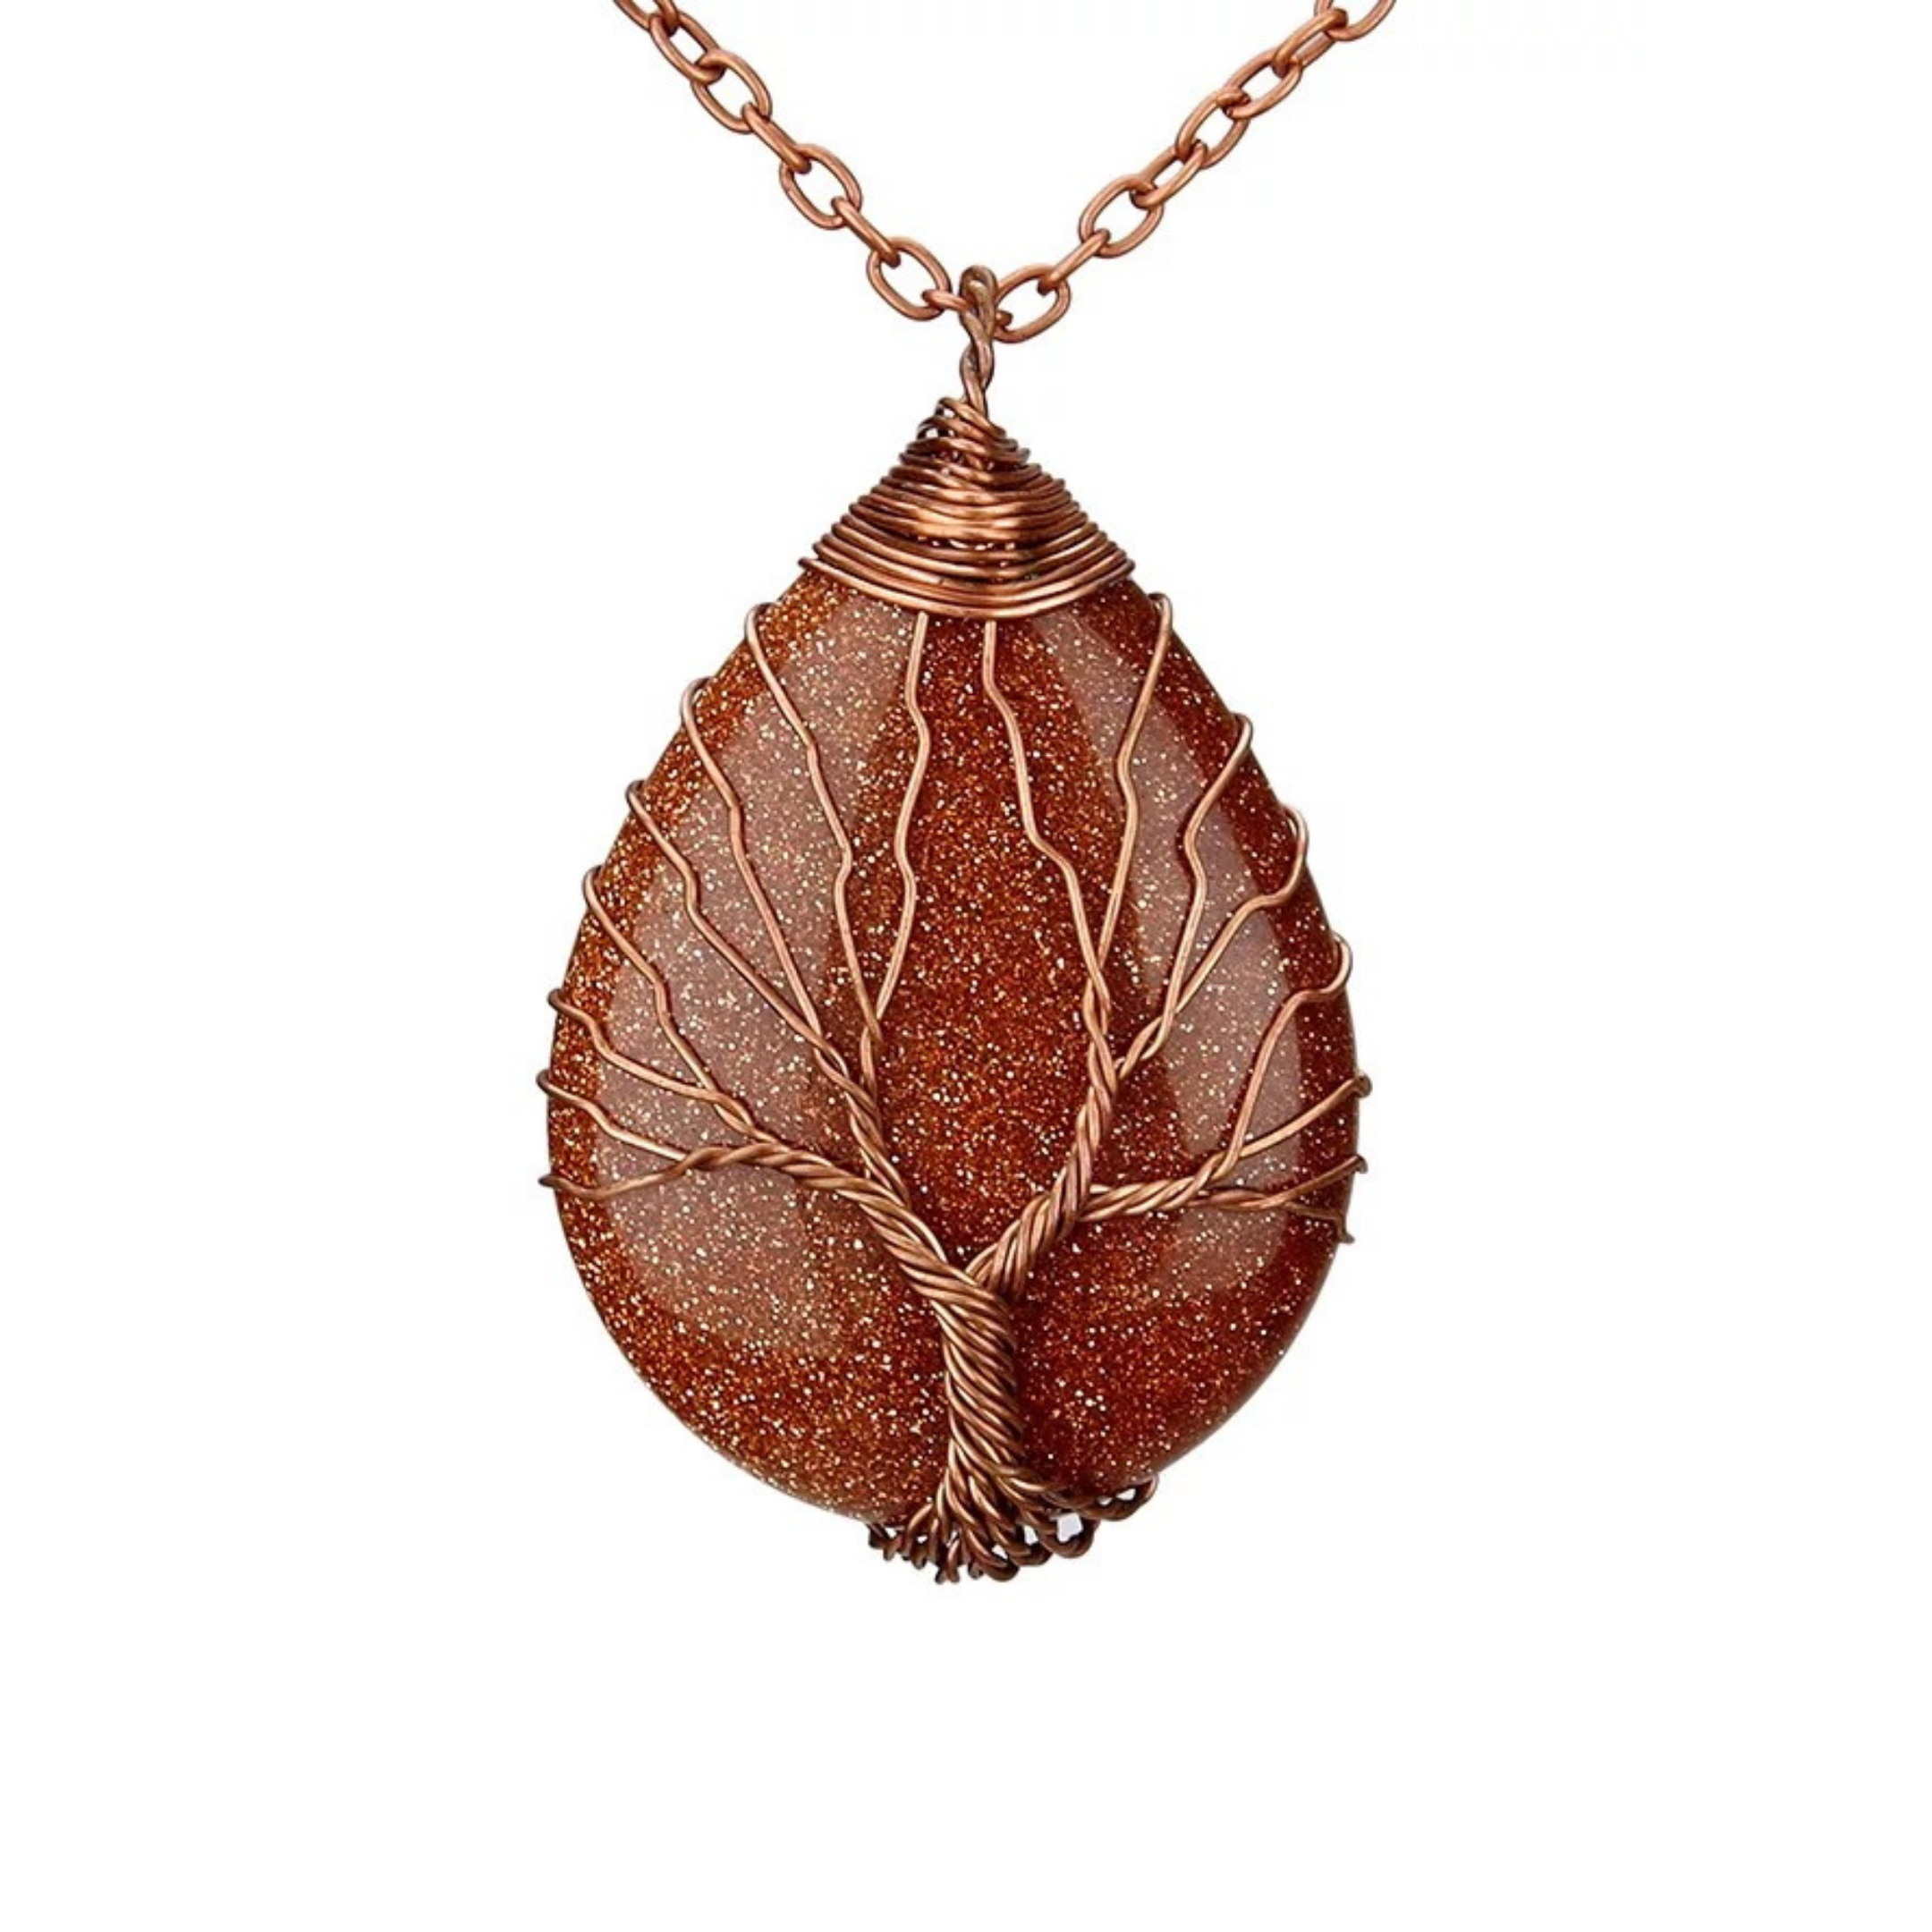 Goldstone gemstone necklace with Tree of life